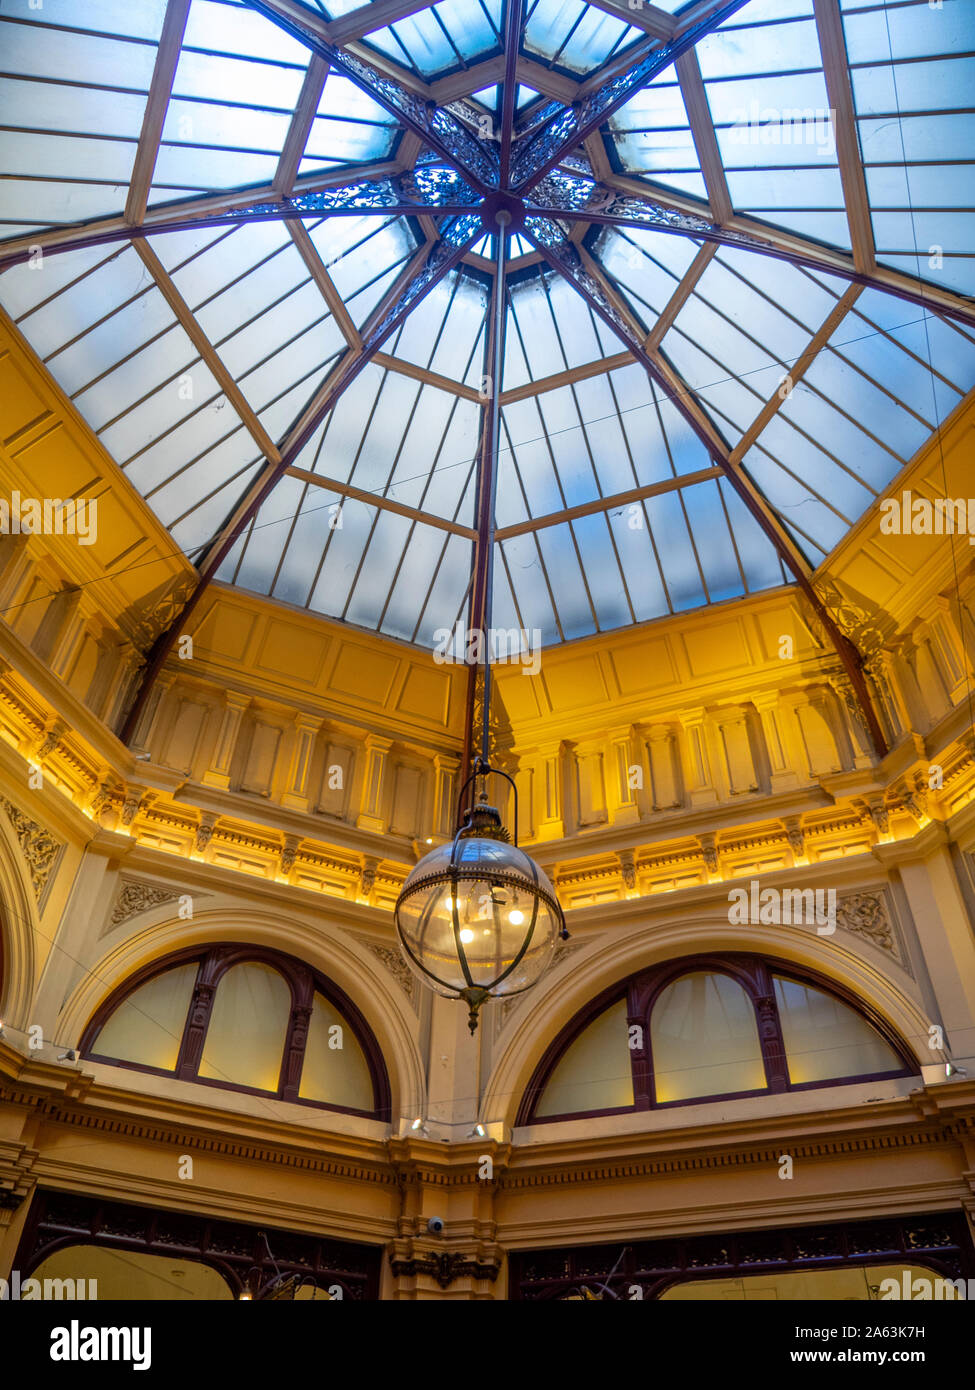 Wrought iron and glass dome roof in centre of Block Arcade Melbourne Victoria Australia. Stock Photo